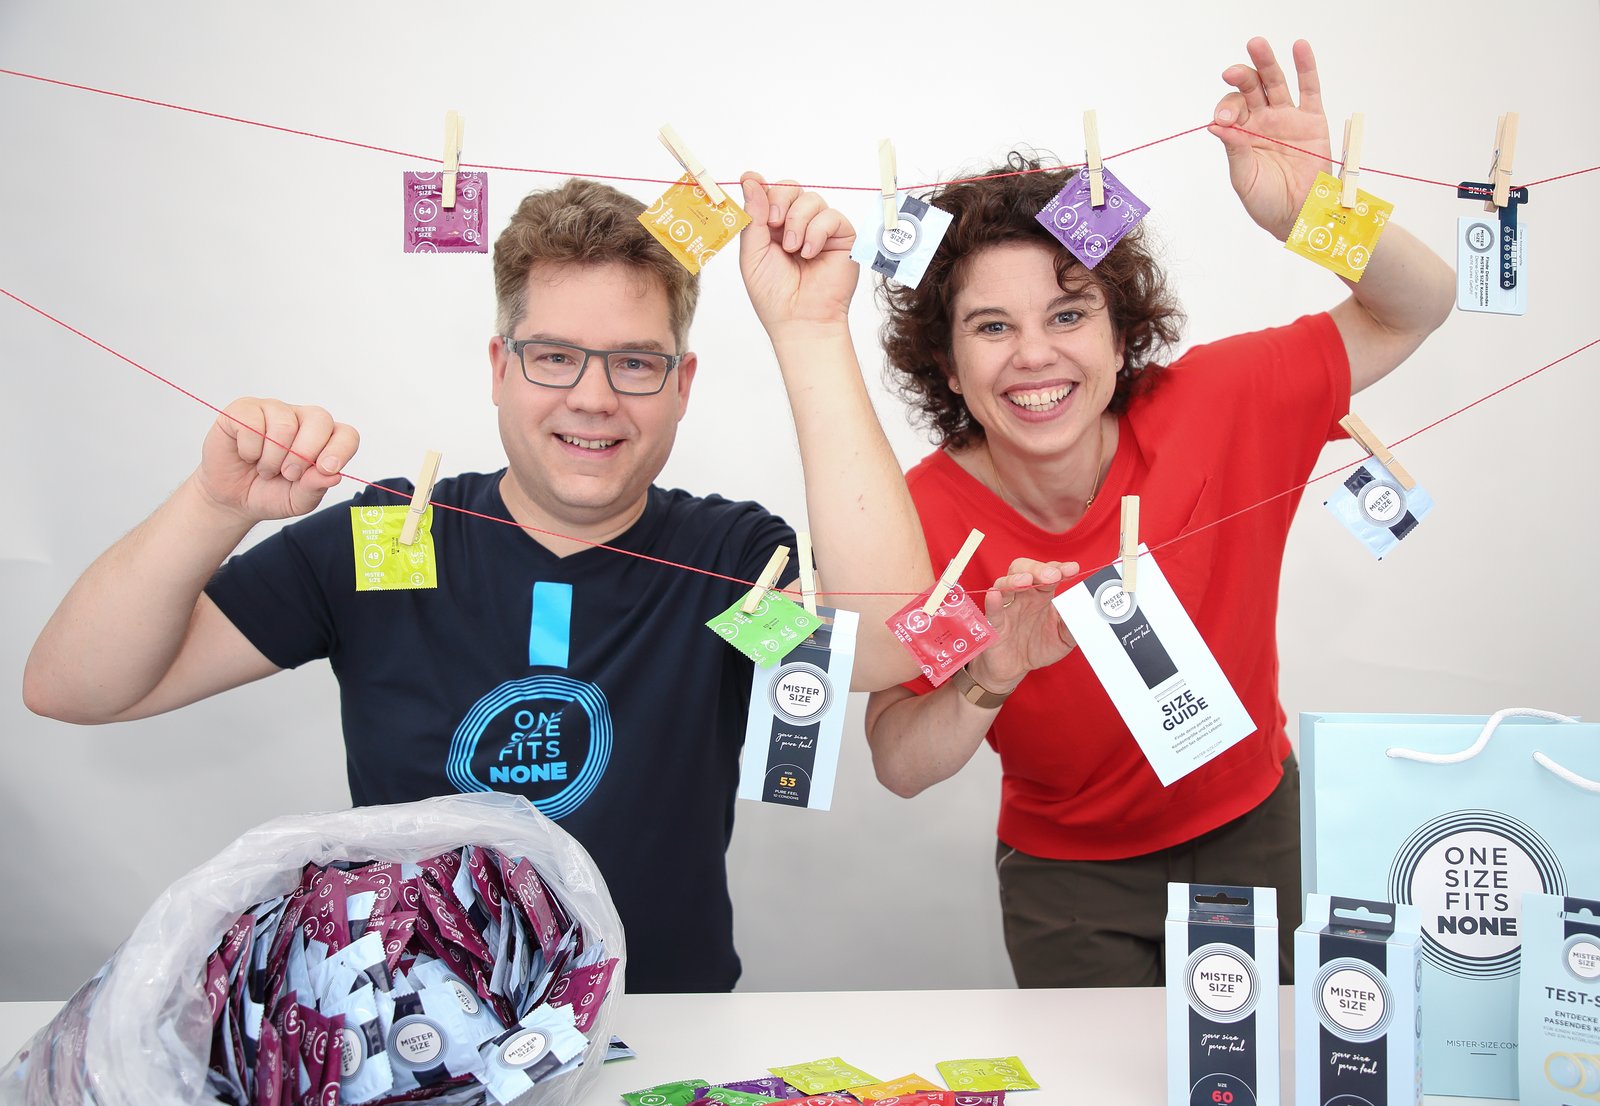 Jan and Eva Krause Managing Directors of Vinergy GmbH with Mister Size condoms